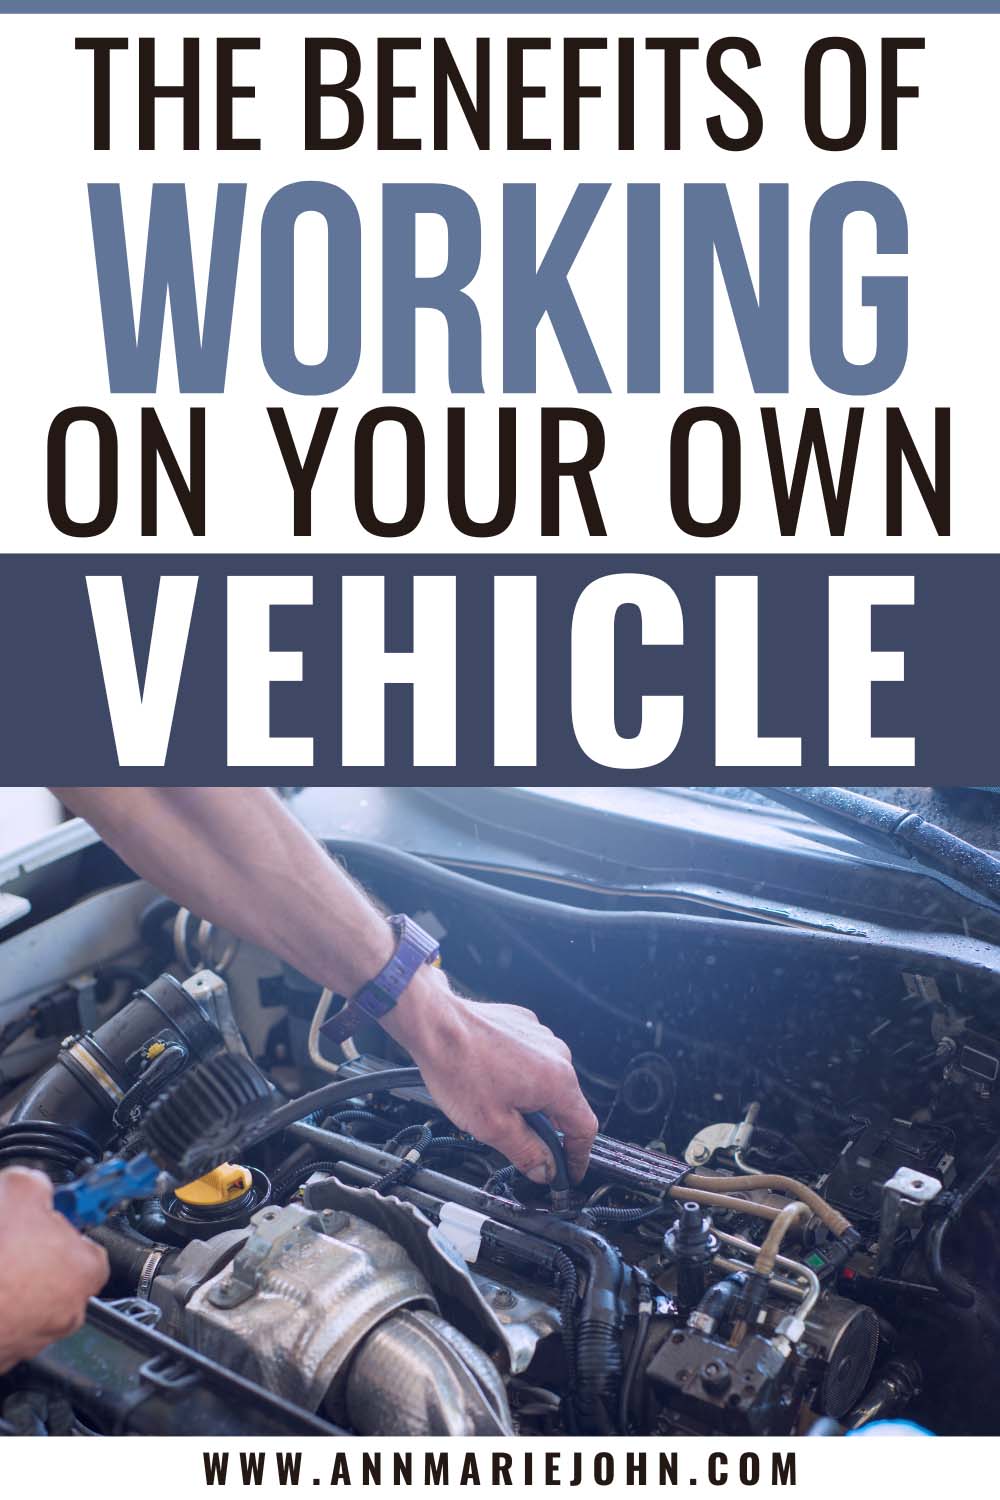 The Benefits of Working on Your Own Vehicle